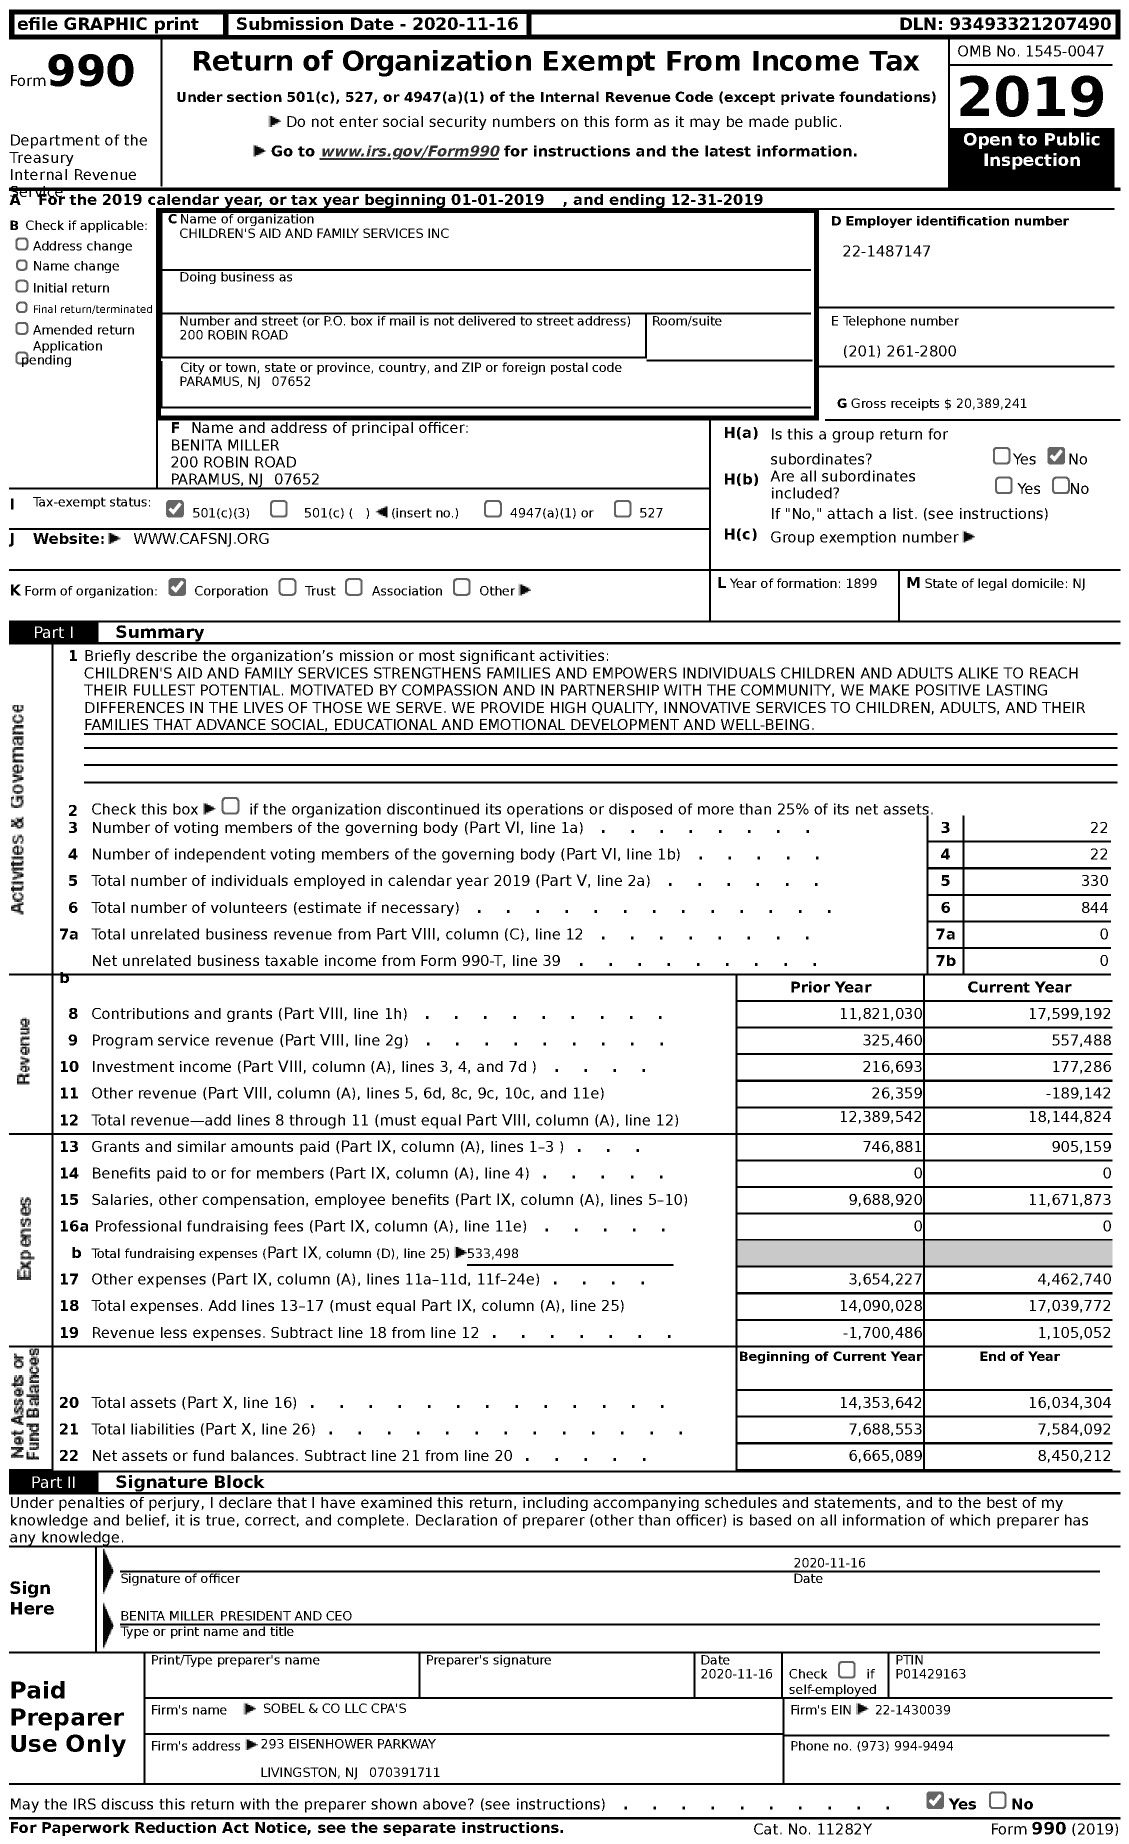 Image of first page of 2019 Form 990 for Children's Aid and Family Services (CAFSNJ)